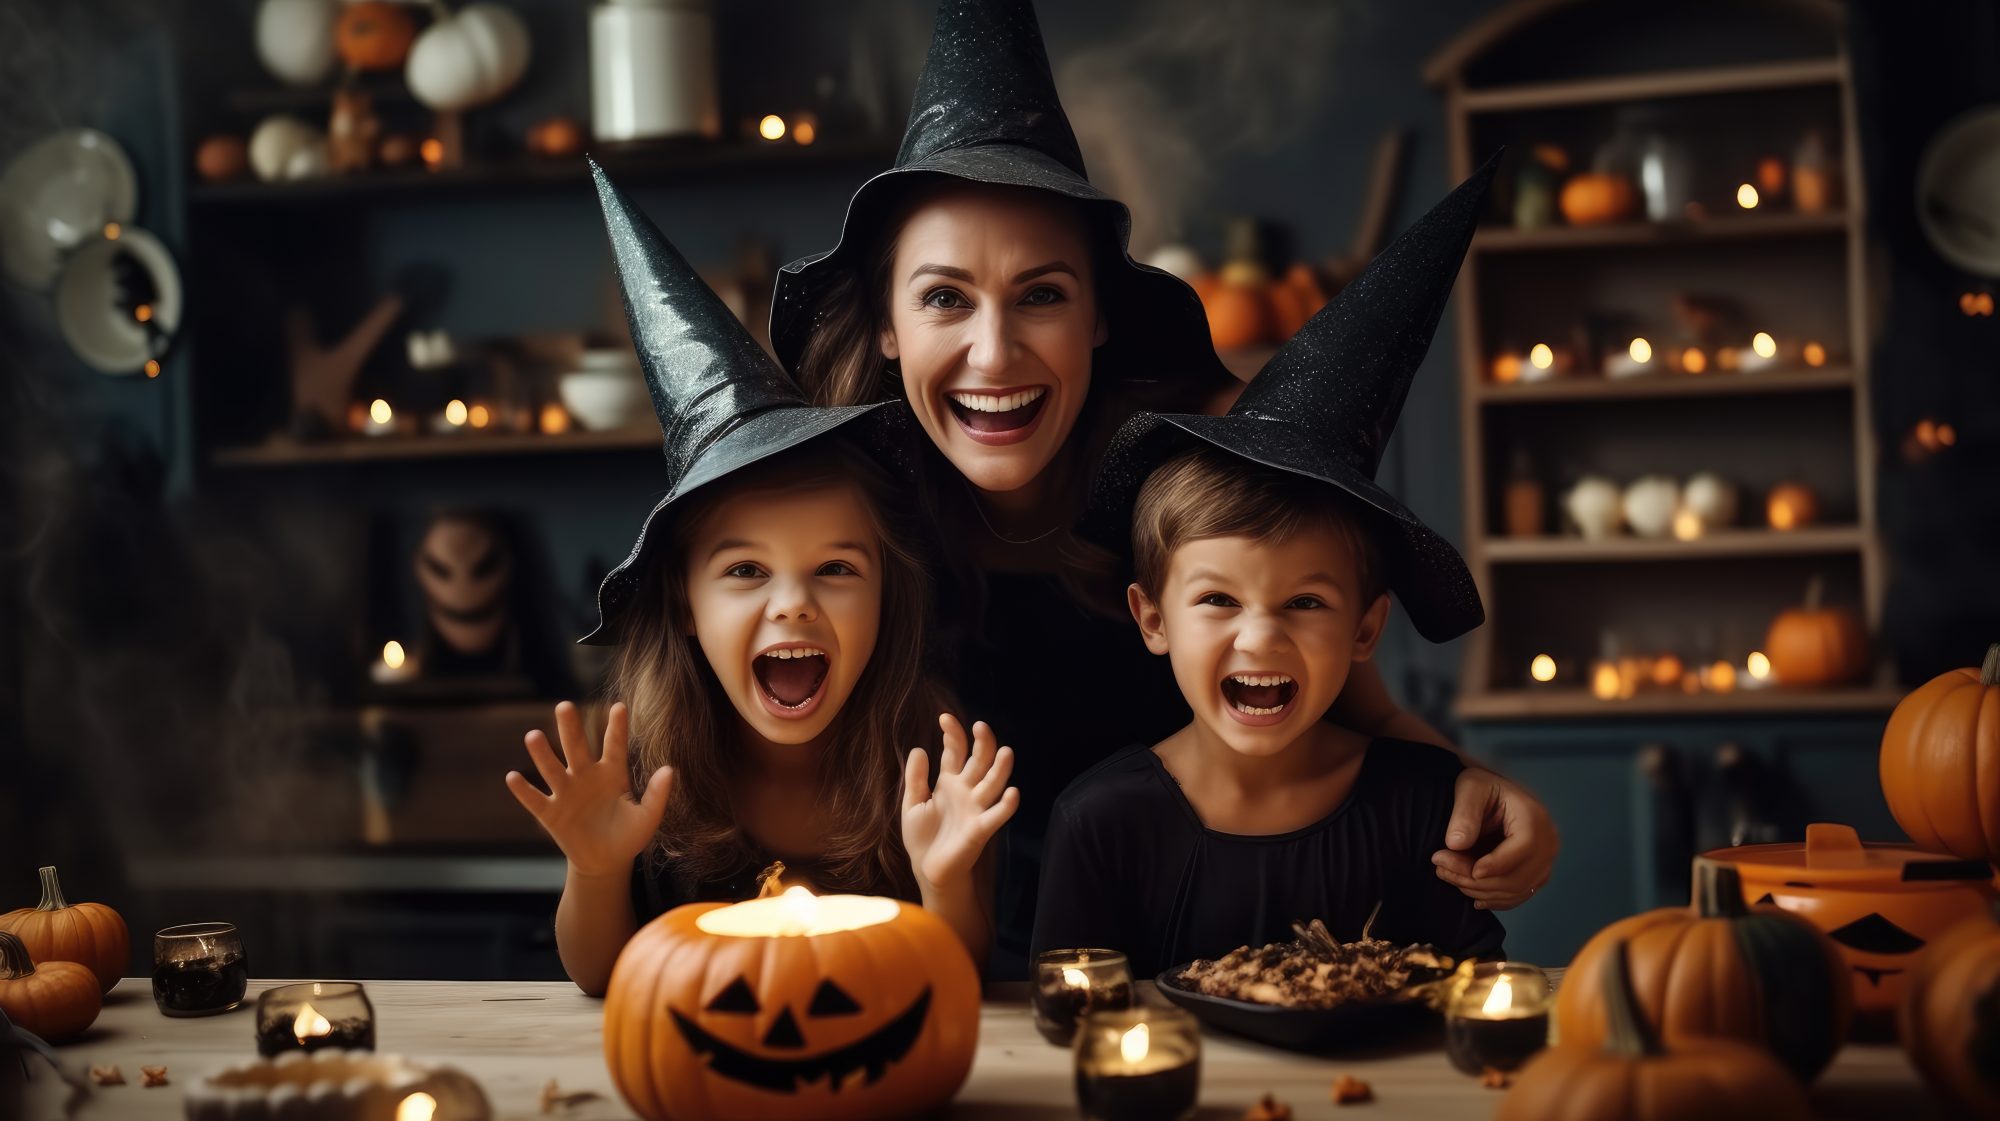 Halloween for Divorced Parents: Keeping It Fun and Drama-Free